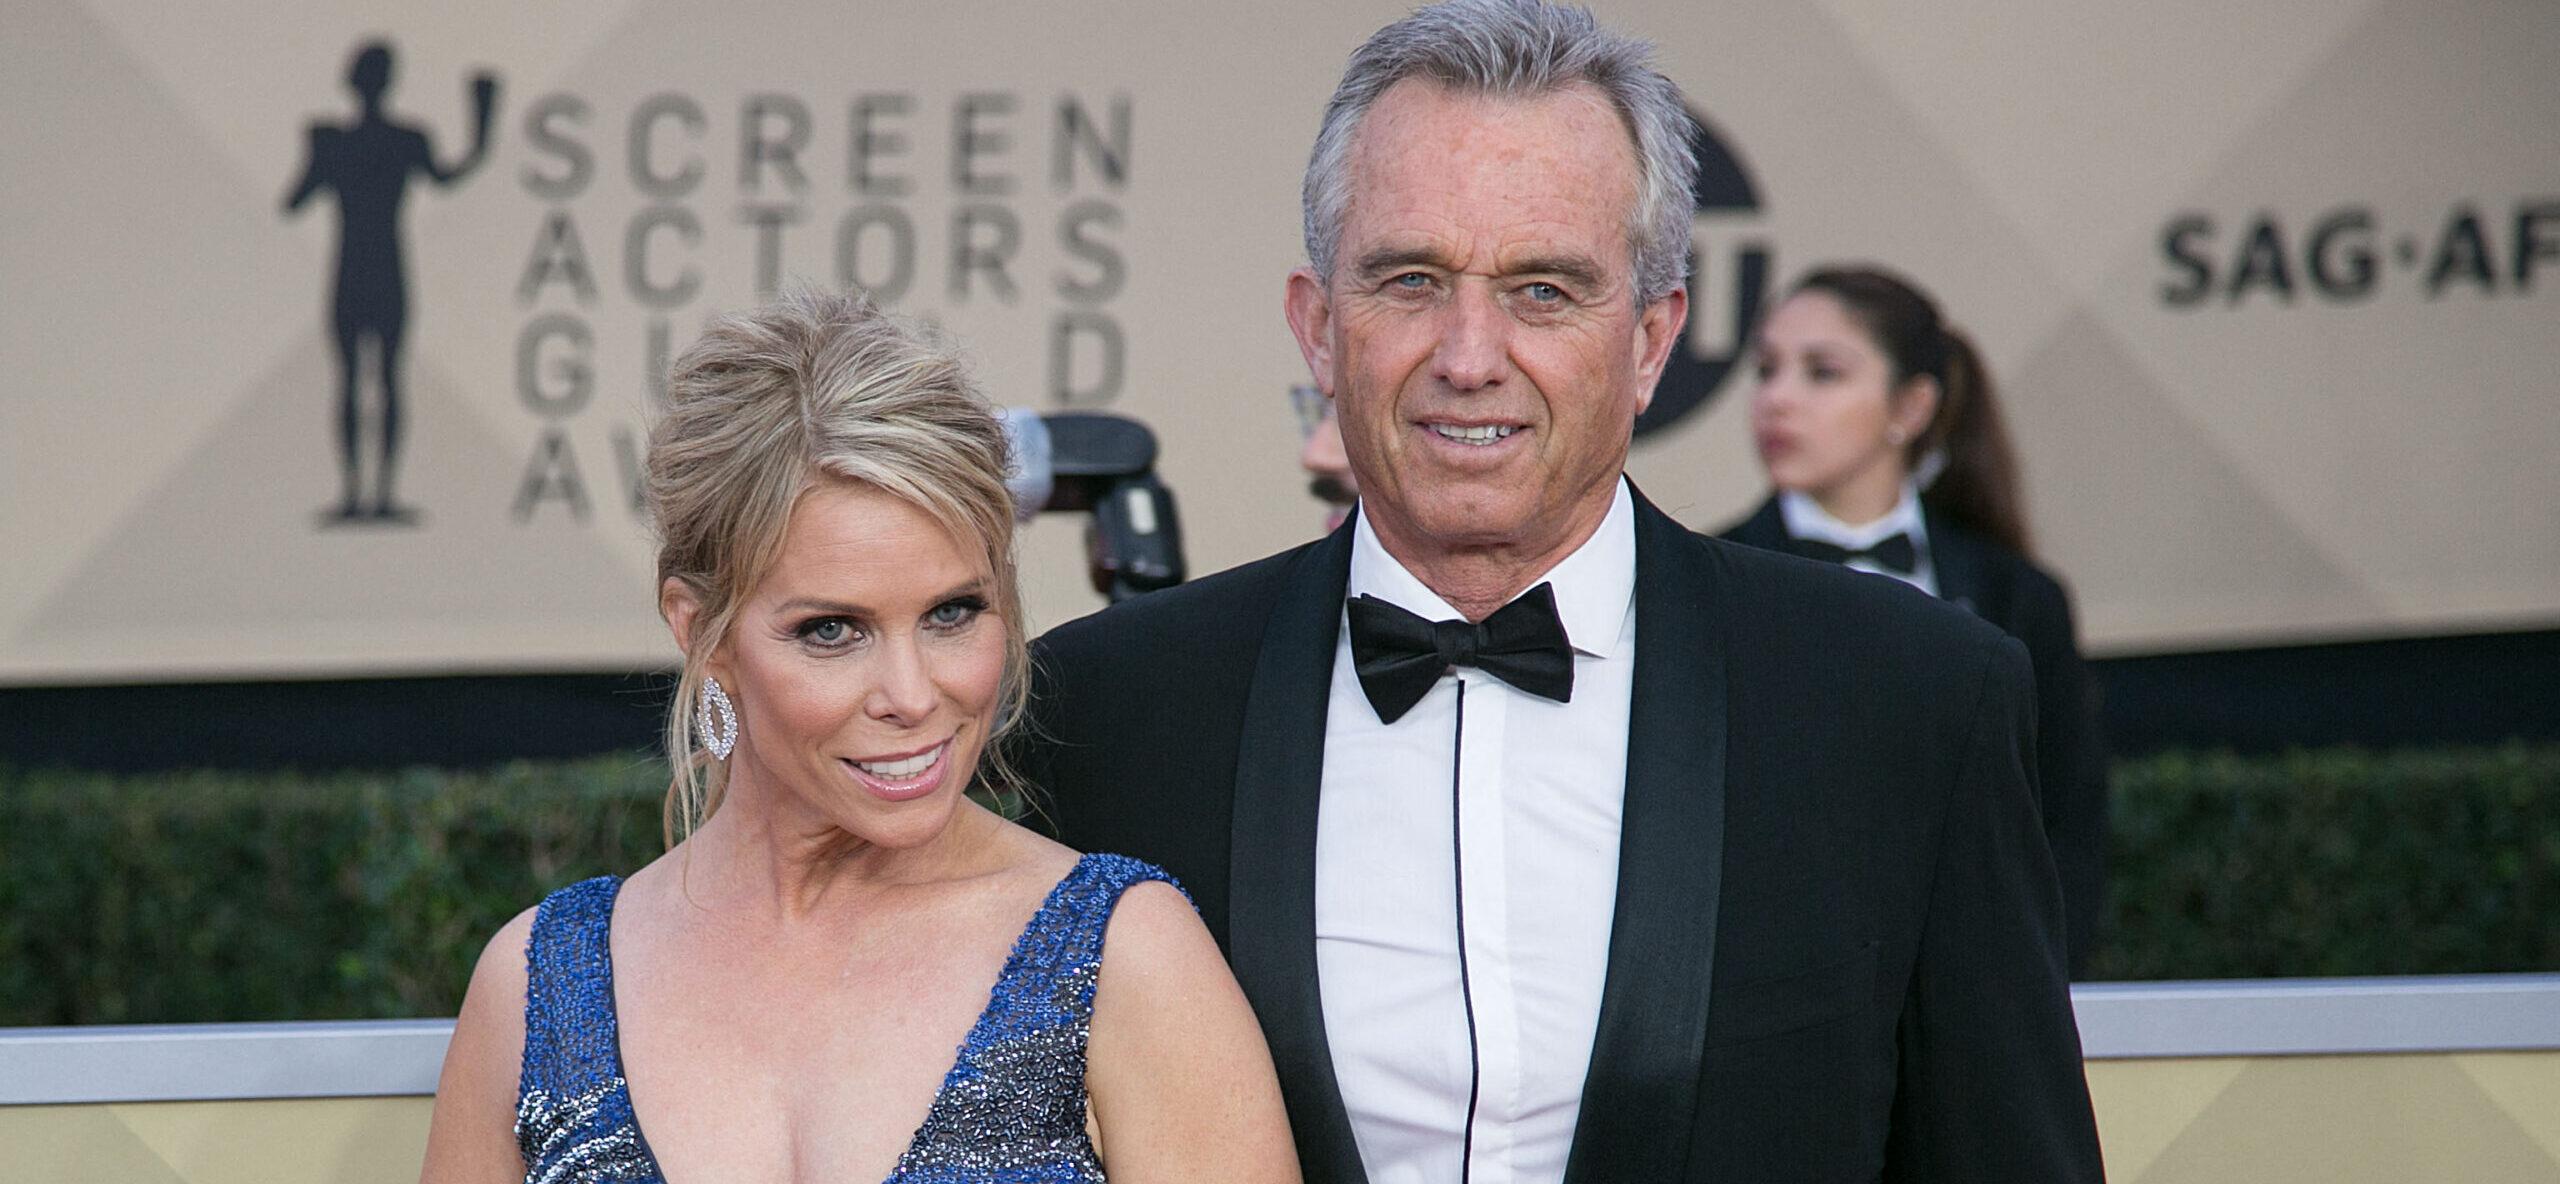 Robert F. Kennedy Jr. Offered to separate from Cheryl Hines to Protect Her